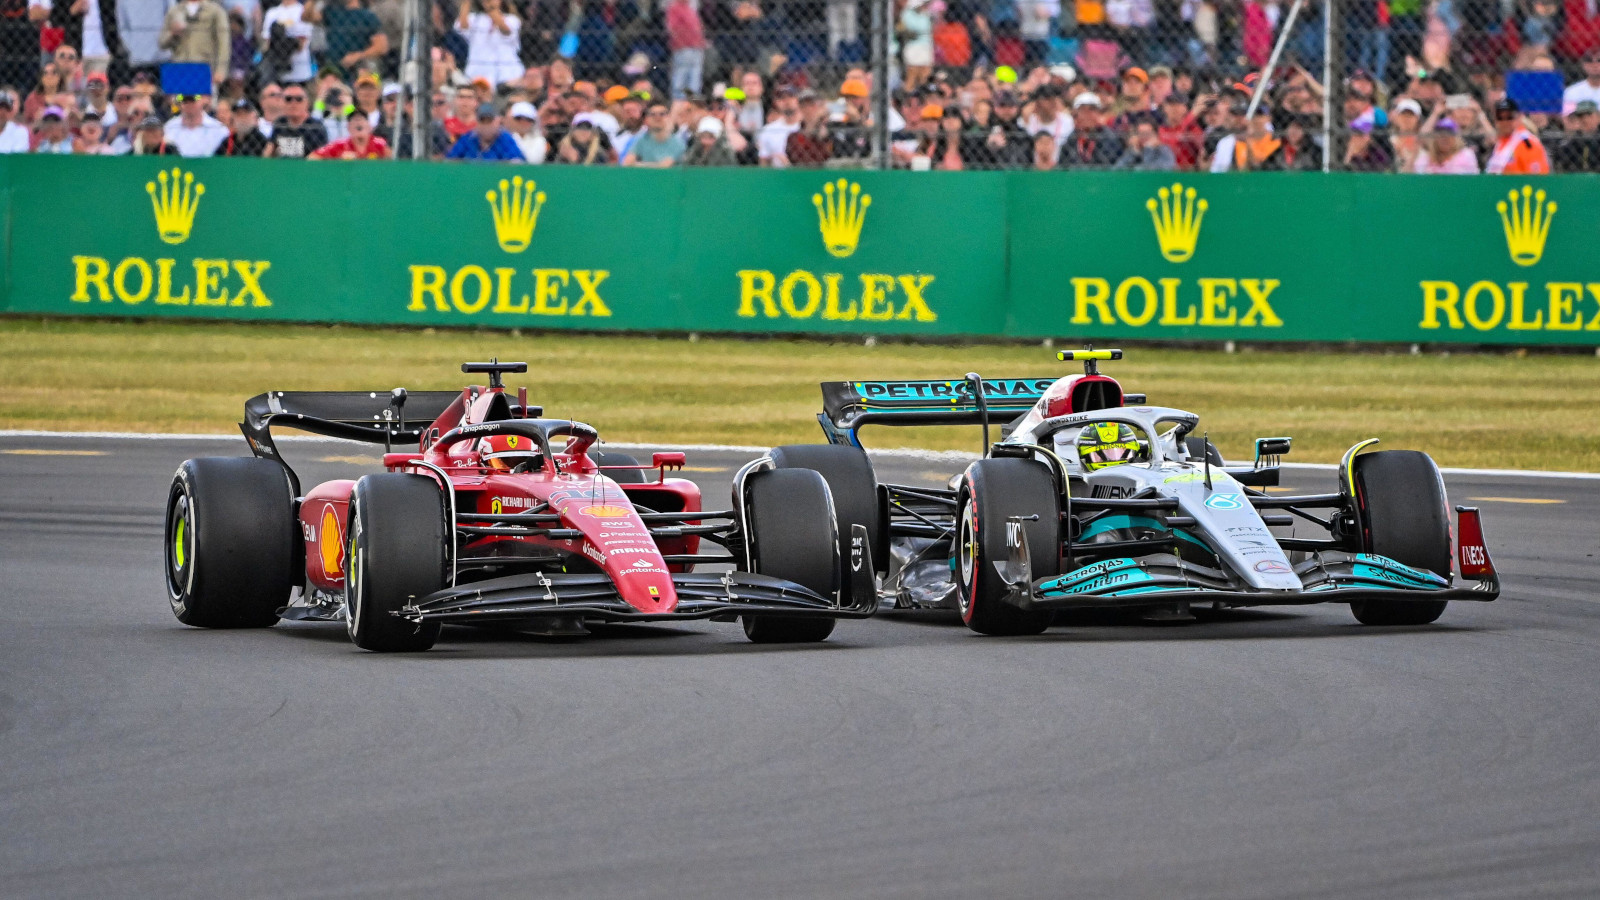 Charles Leclerc racing Mercedes driver Lewis Hamilton. Silverstone July 2022